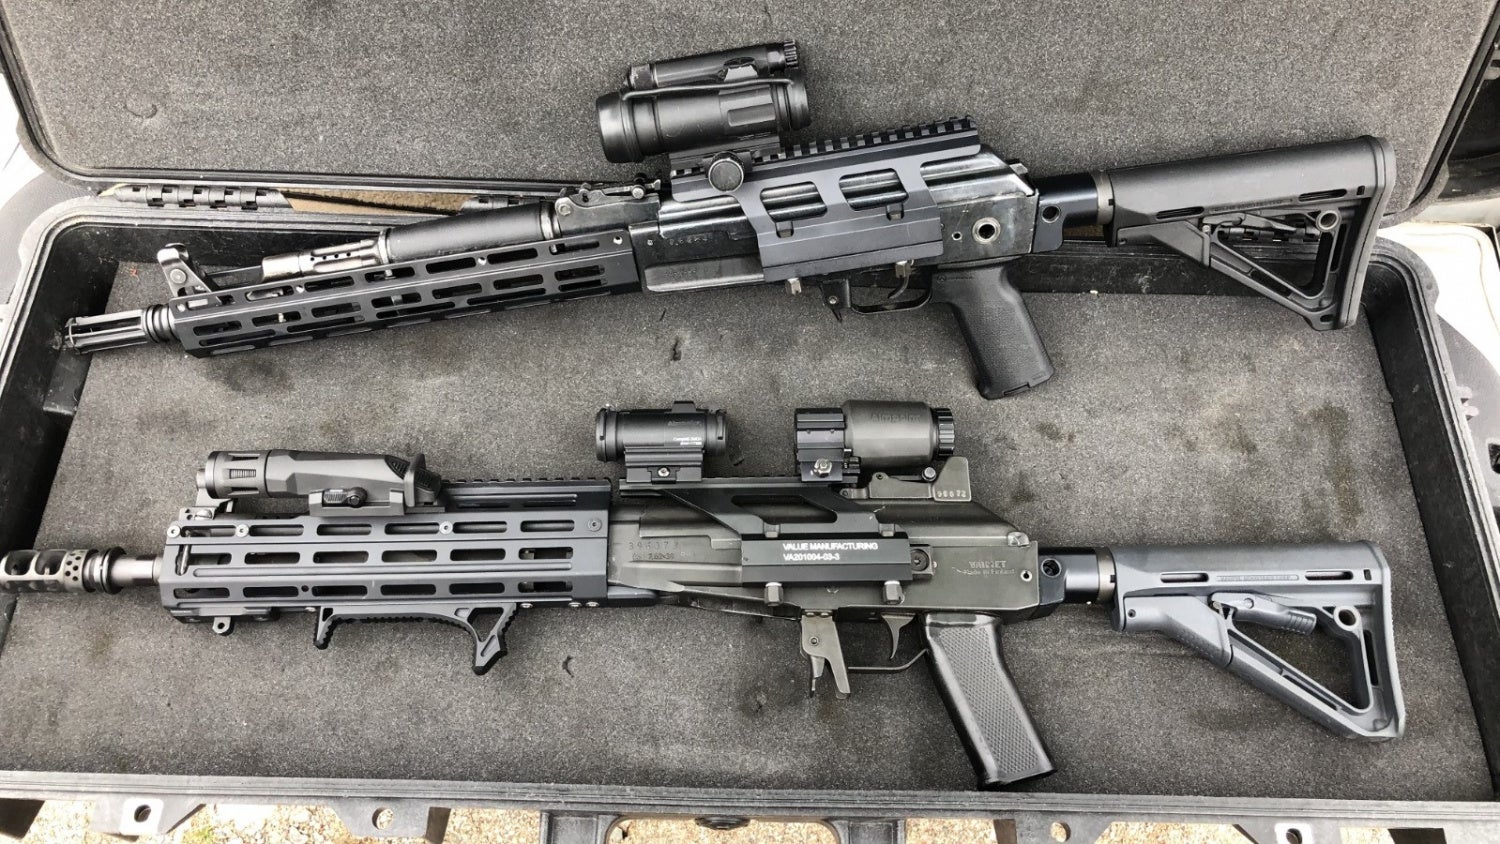 AK 2.0 upgrade kit installed on two different AK variants